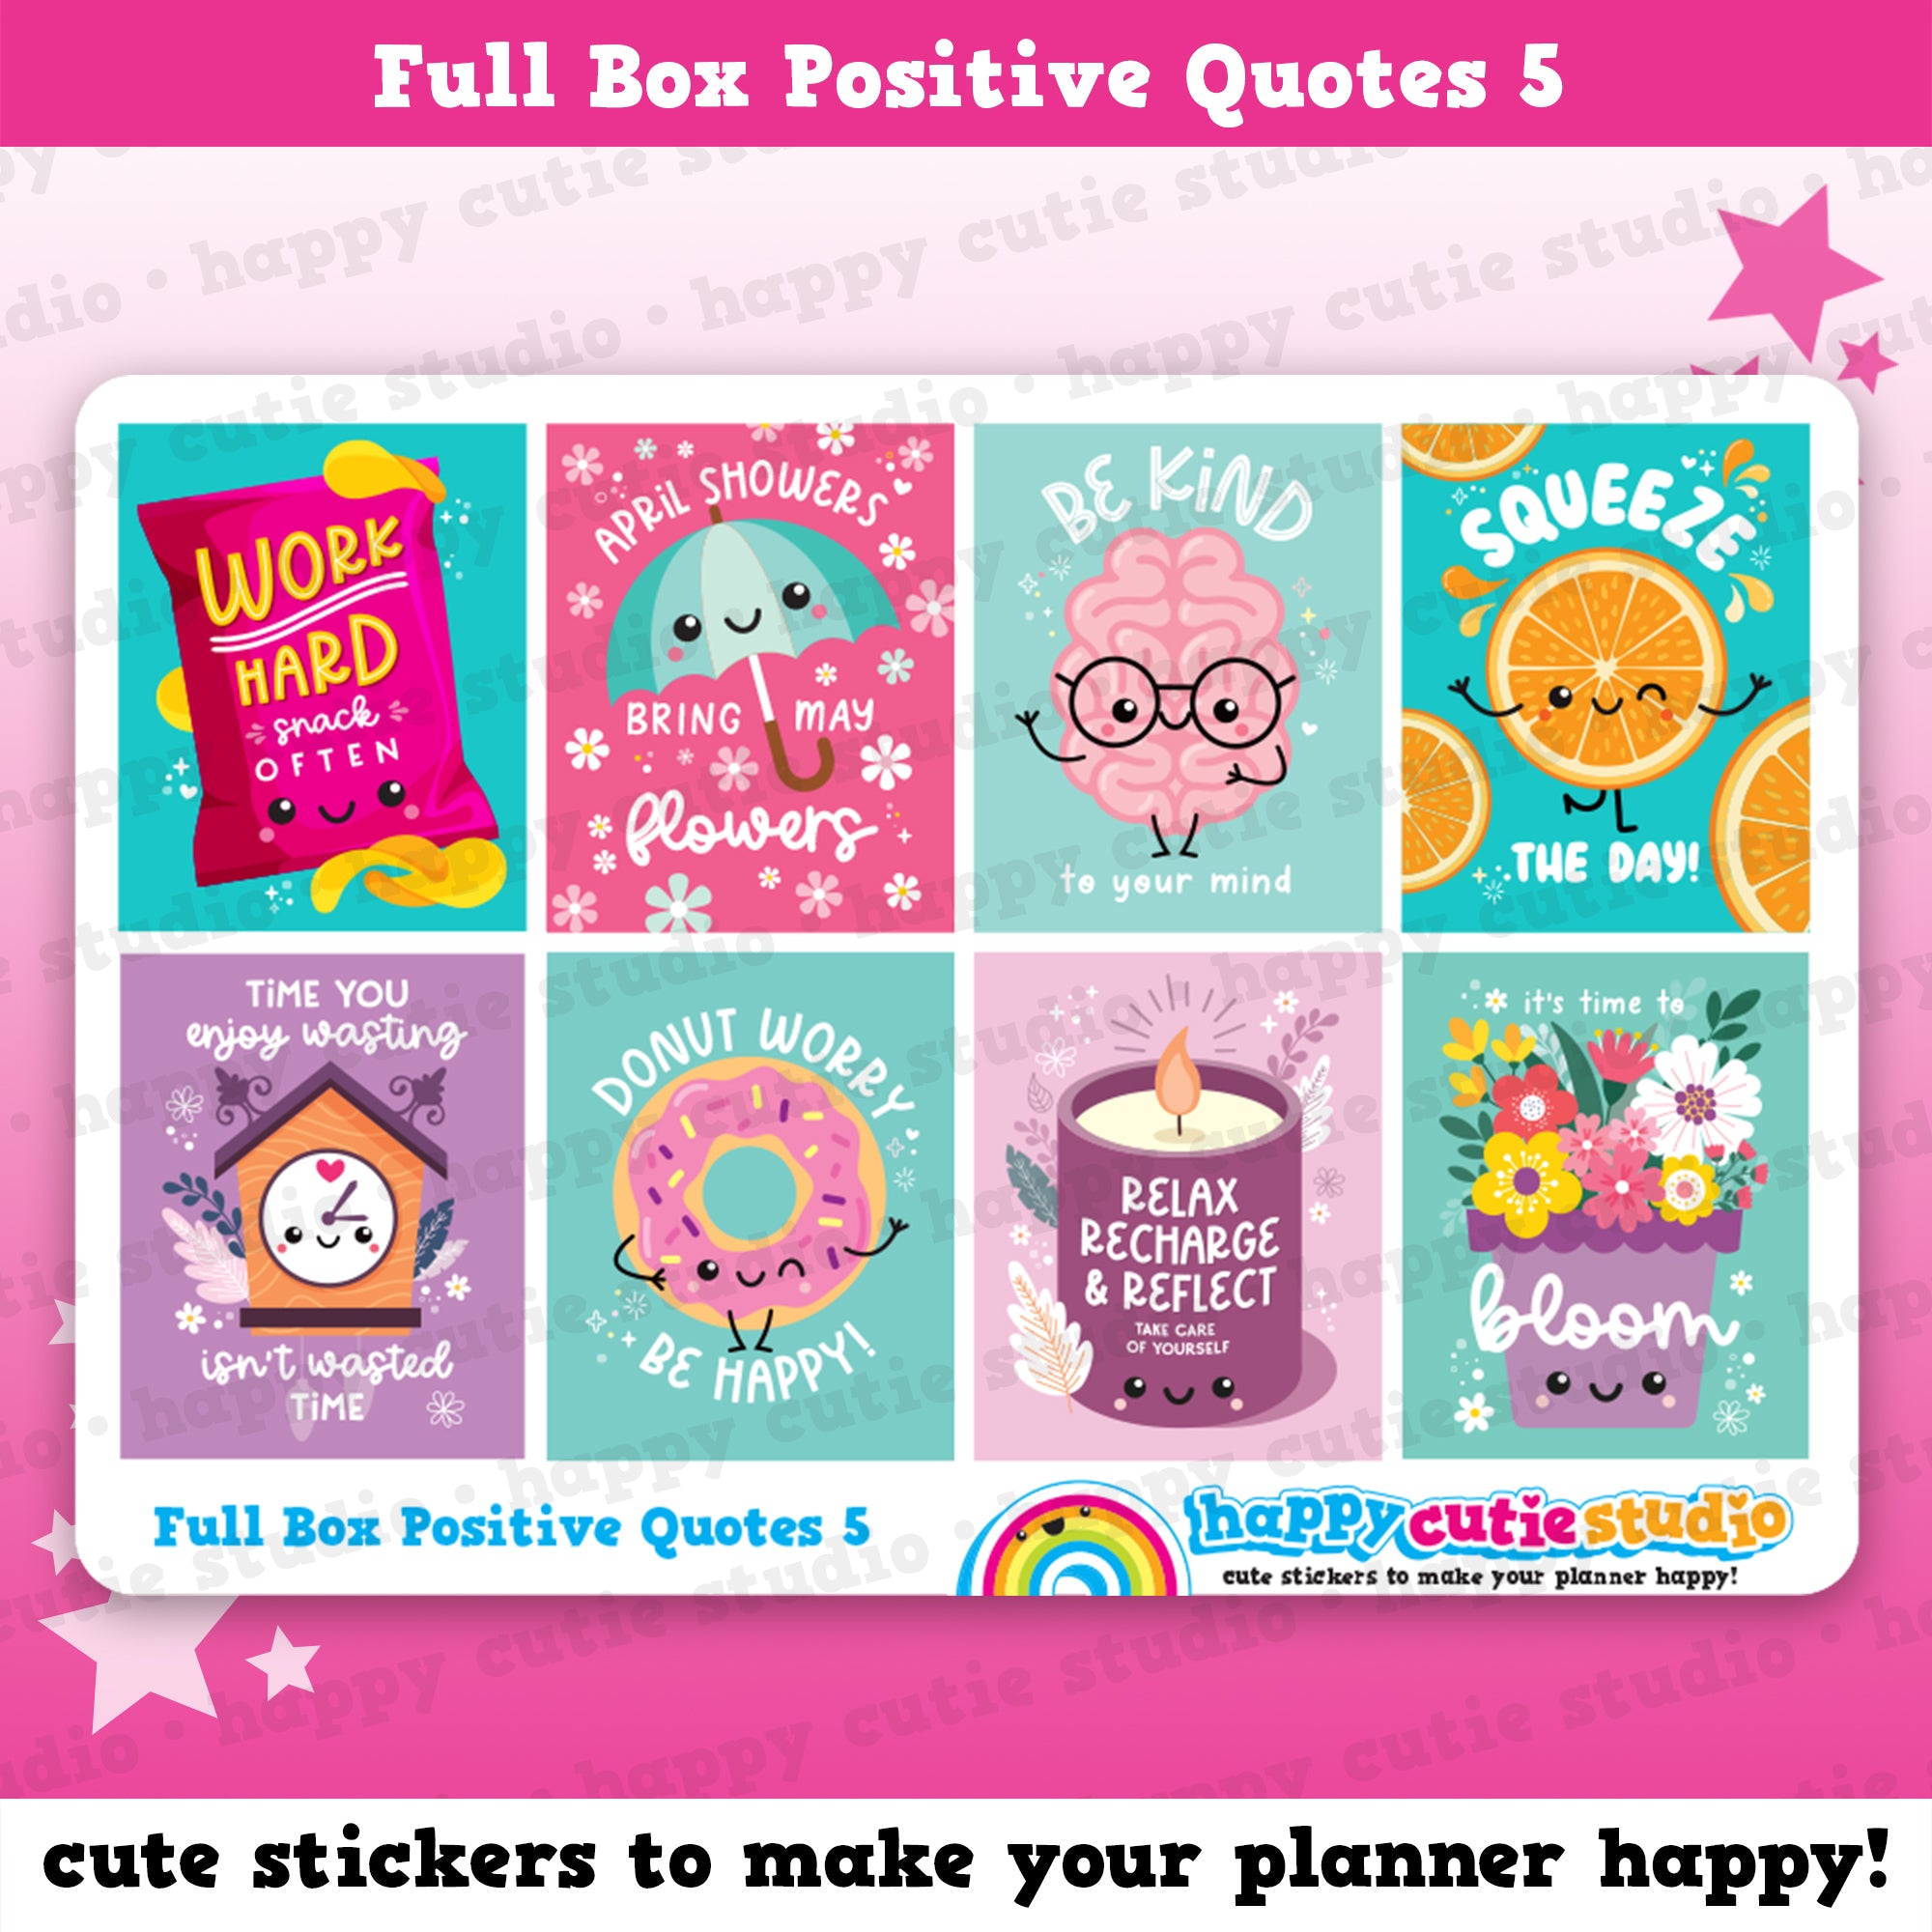 8 Full Box Positive Quotes 5/Functional/Practical Planner Stickers